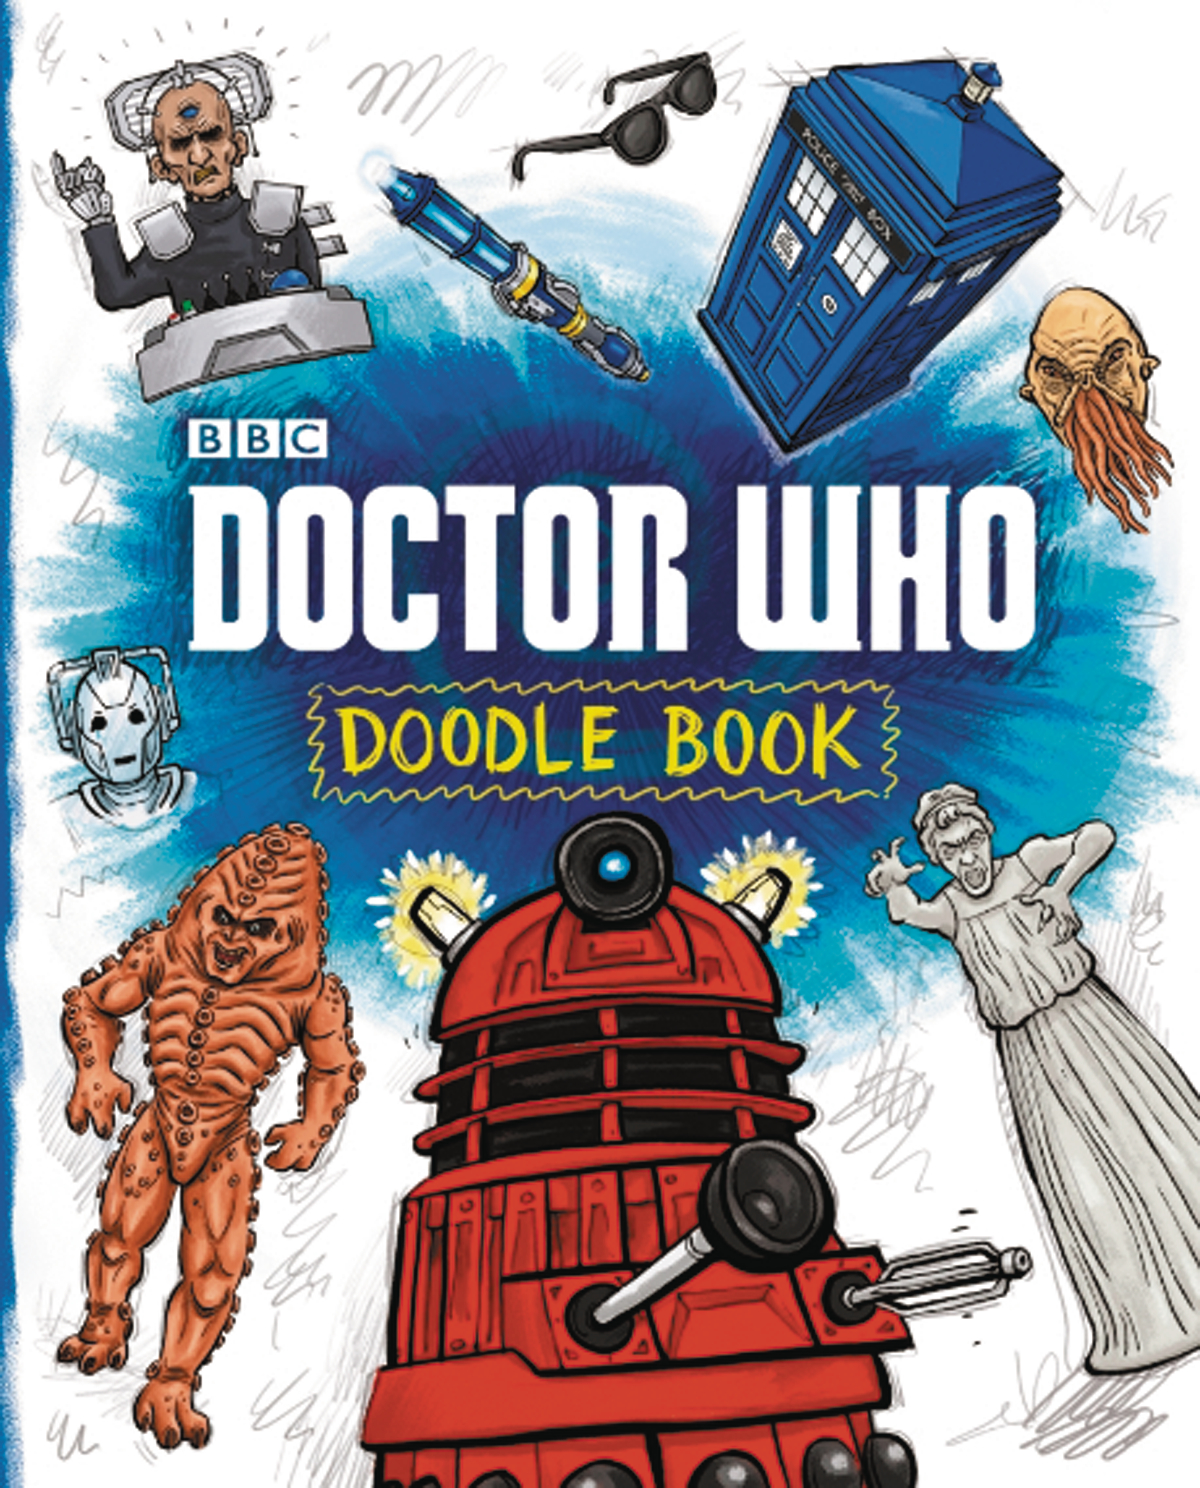 DOCTOR WHO DOODLE BOOK